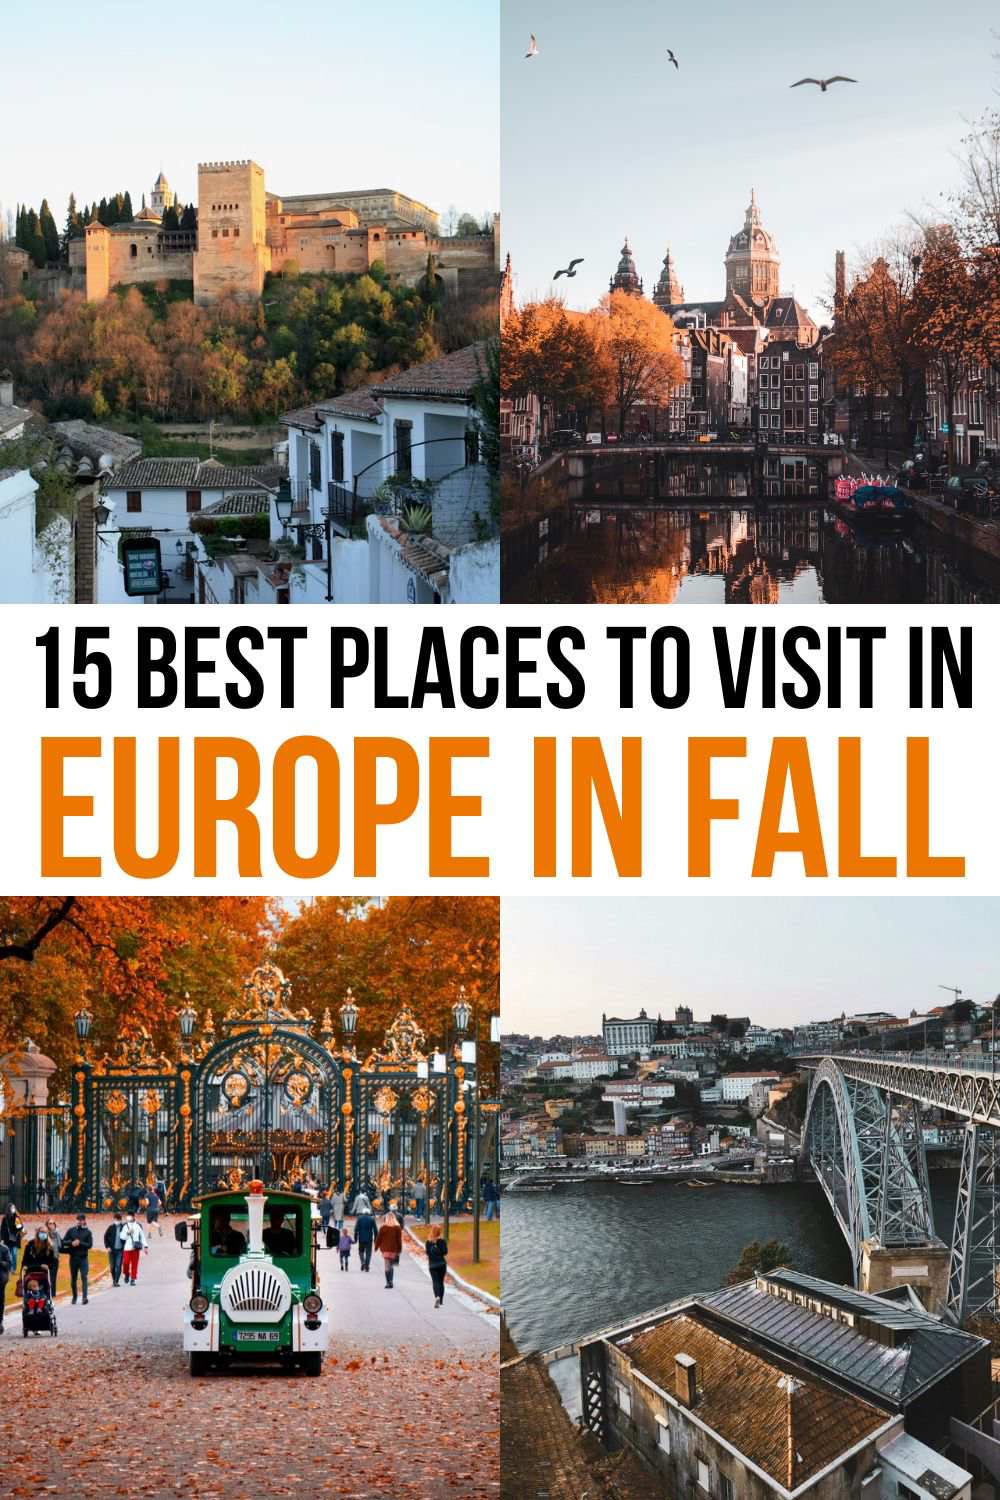 Don't know where to go in Europe this fall? Discover the 15 best autumn destinations in Europe, where you'll have the best time of your life! europe travel fall | best places to visit in europe in fall | fall trip ideas | autumn travel ideas | october travel destinations list | best places to travel in europe in september | september travel destinations europe | november travel destinations | best places to travel in europe in november | november travel destinations europe